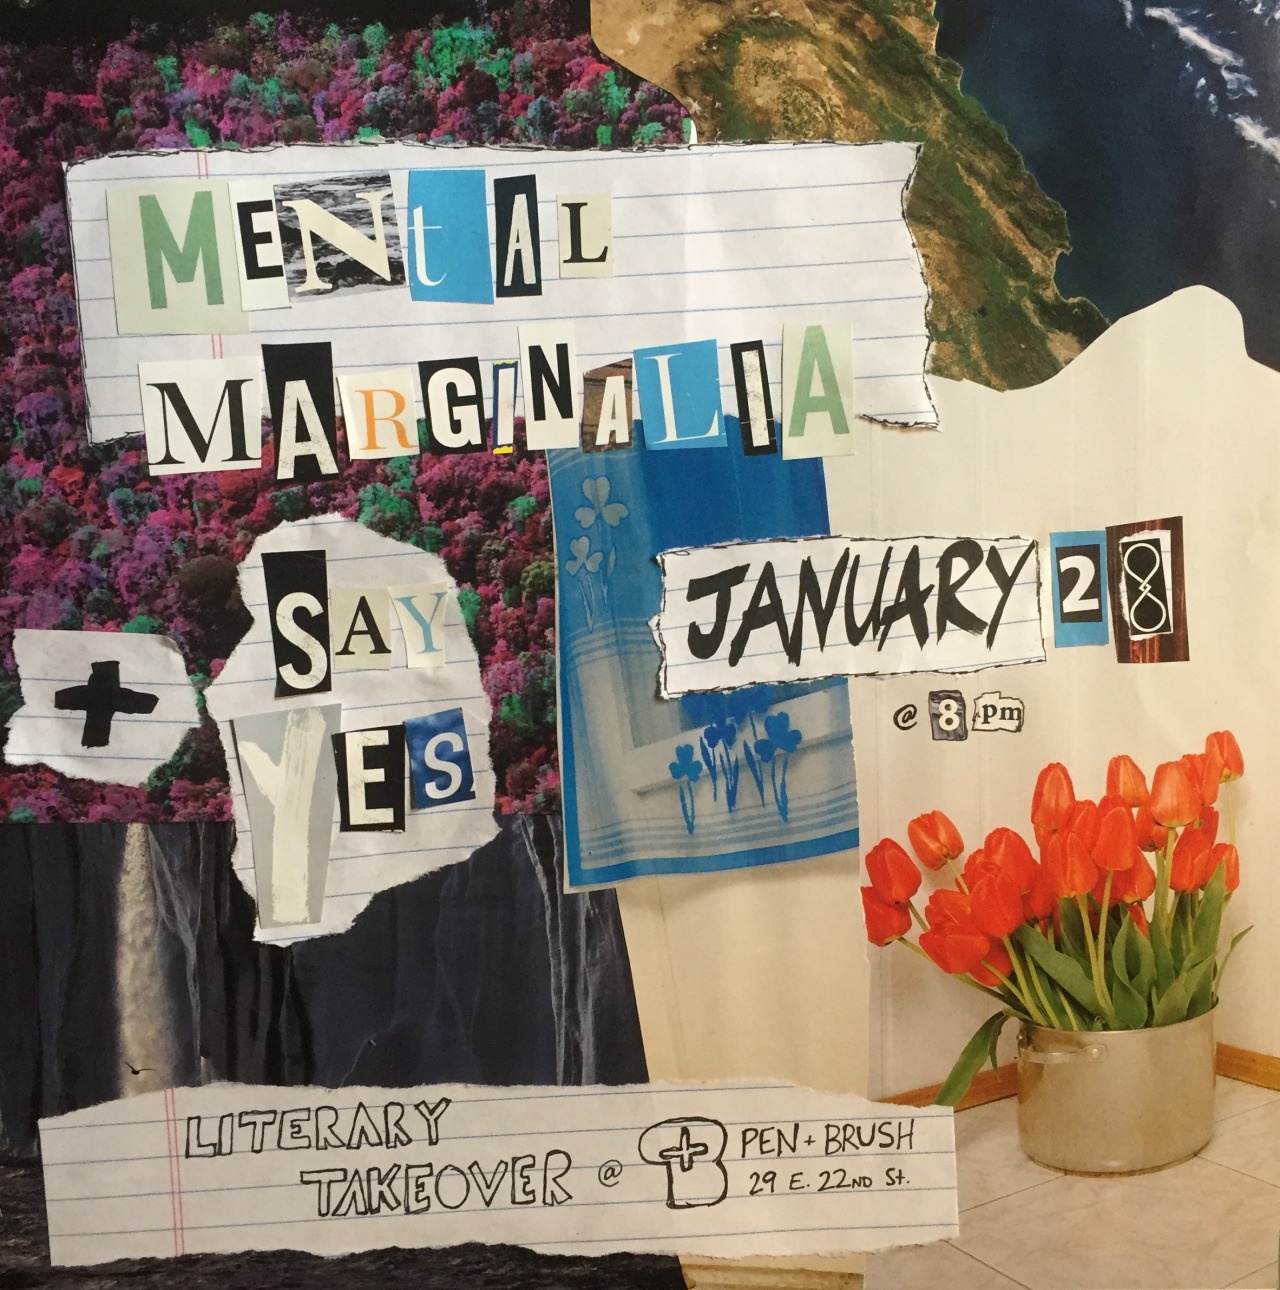 Mental Marginalia is joining forces with Say Yes Electric Collective to bring Brooklyn to Manhattan. There will be: art! poetry! music! light refreshments! cool people!
Thursday, January 28, 8pm at the Pen + Brush gallery: 29 E 22nd St.